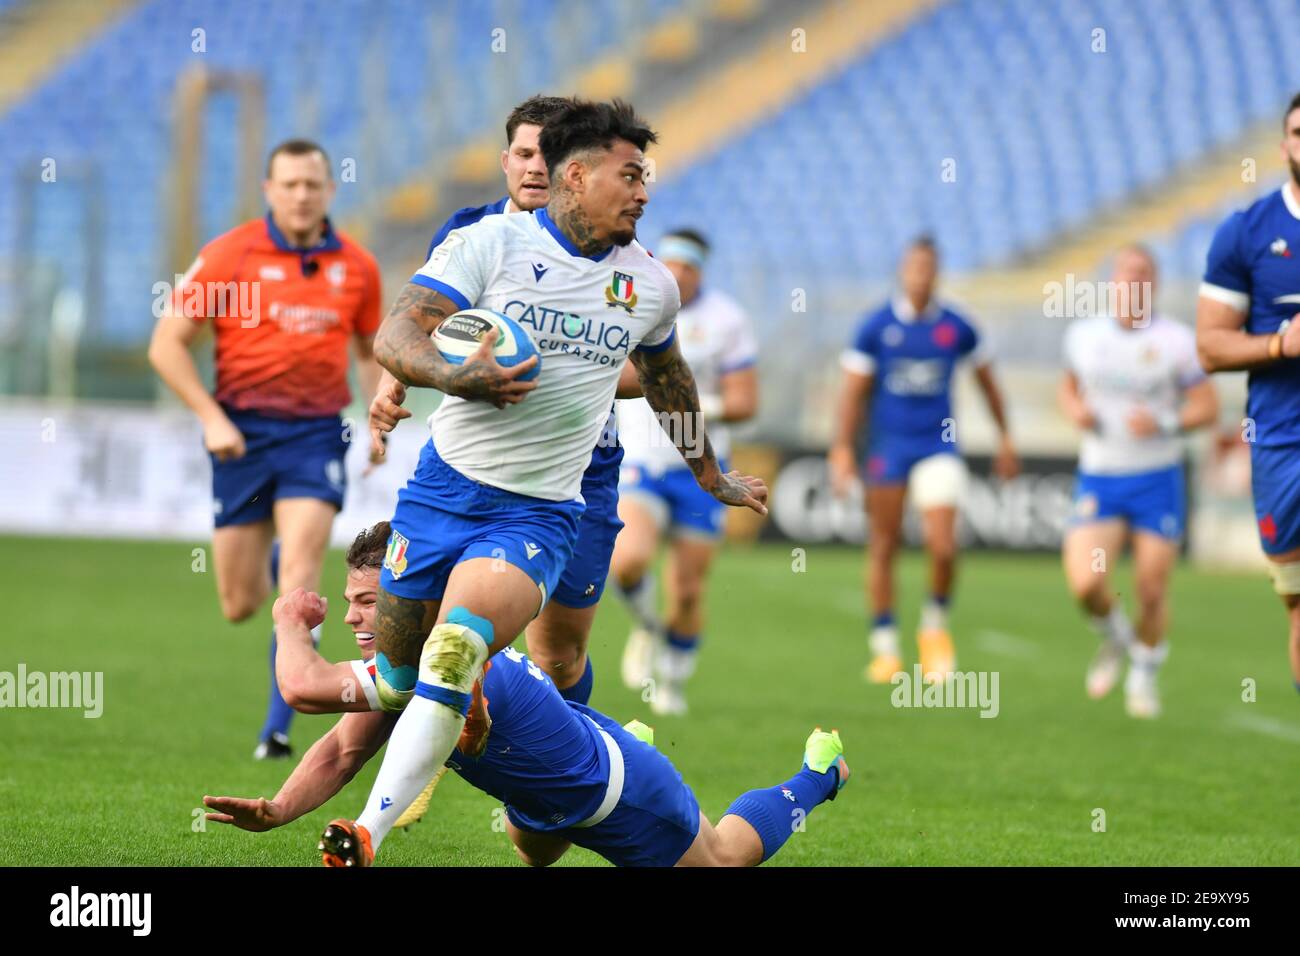 Rome, Italy. 6th Feb, 2021. Rome, Italy, Stadio Olimpico, February 06, 2021, Montanna Ioane (Italy) carries the ball during Italy vs France - Rugby Six Nations match Credit: Carlo Cappuccitti/LPS/ZUMA Wire/Alamy Live News Stock Photo